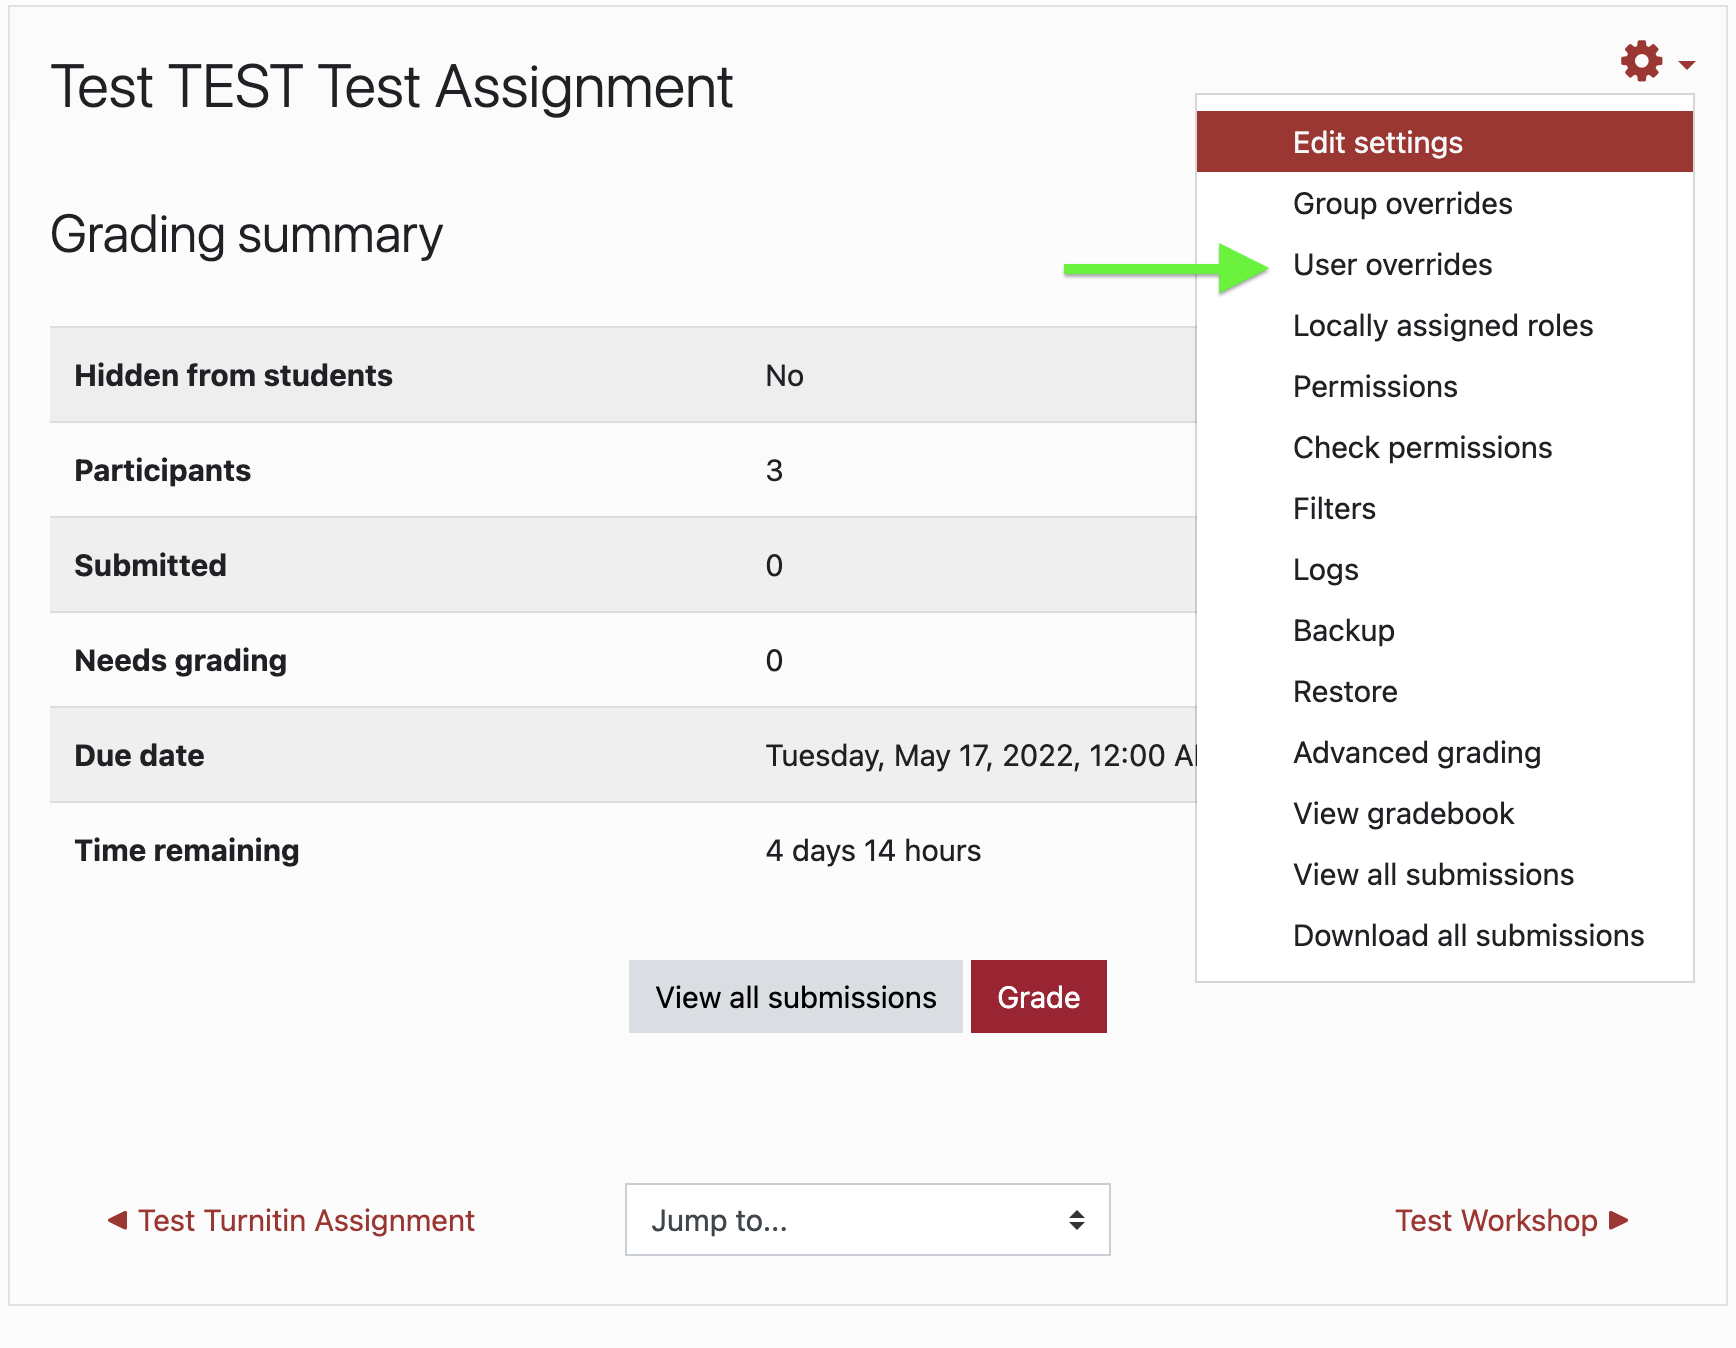 Assignment User Override selection from gear icon